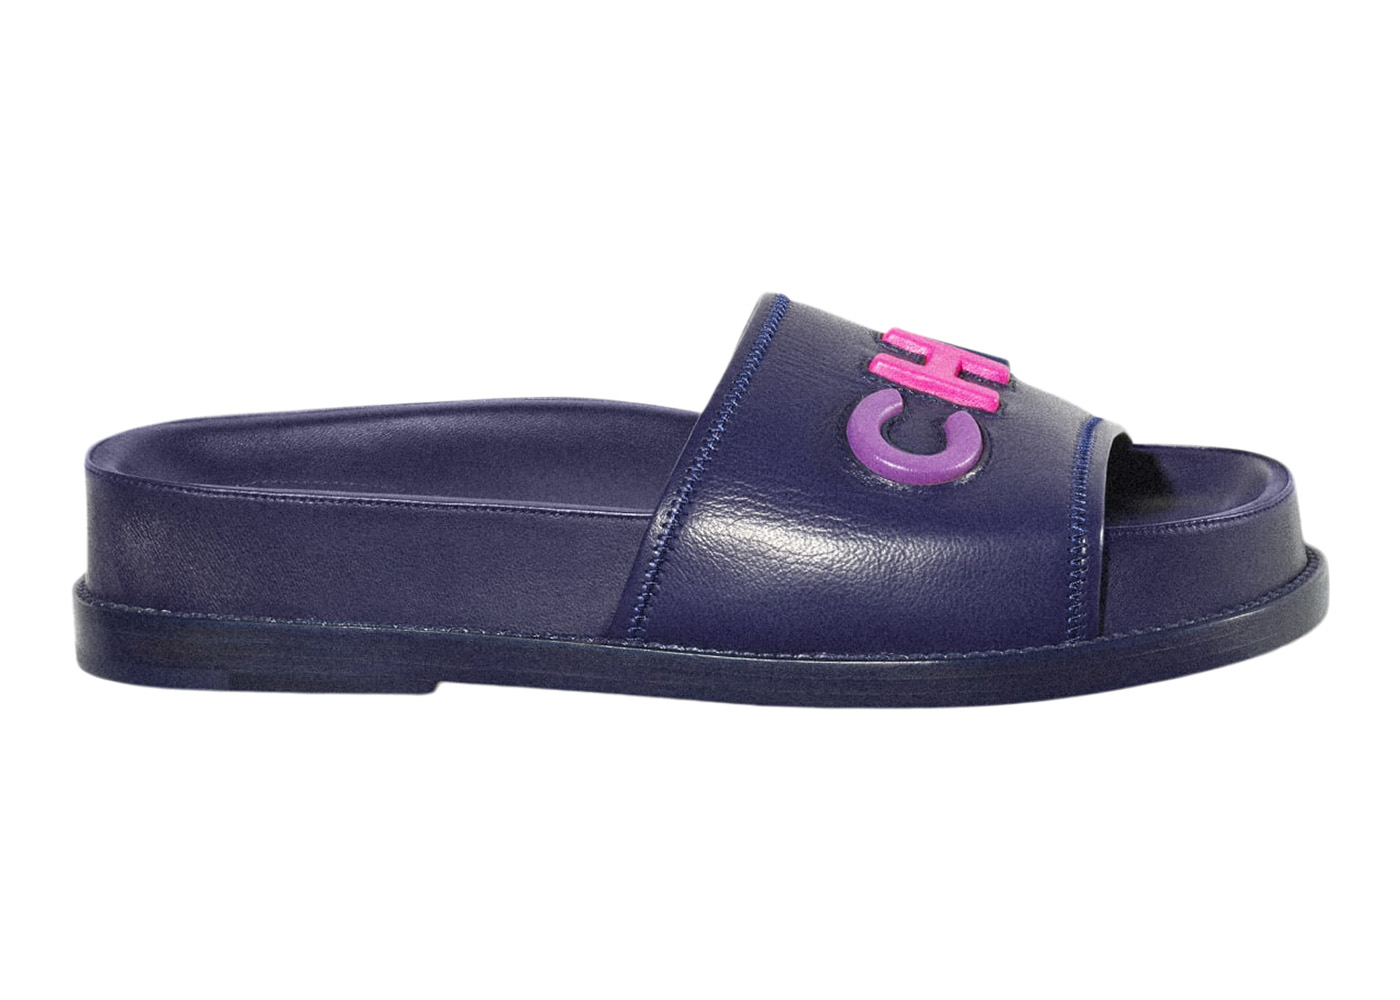 Buy Cheap Chanel shoes for Women's Chanel slippers #9999925562 from  AAAClothing.is